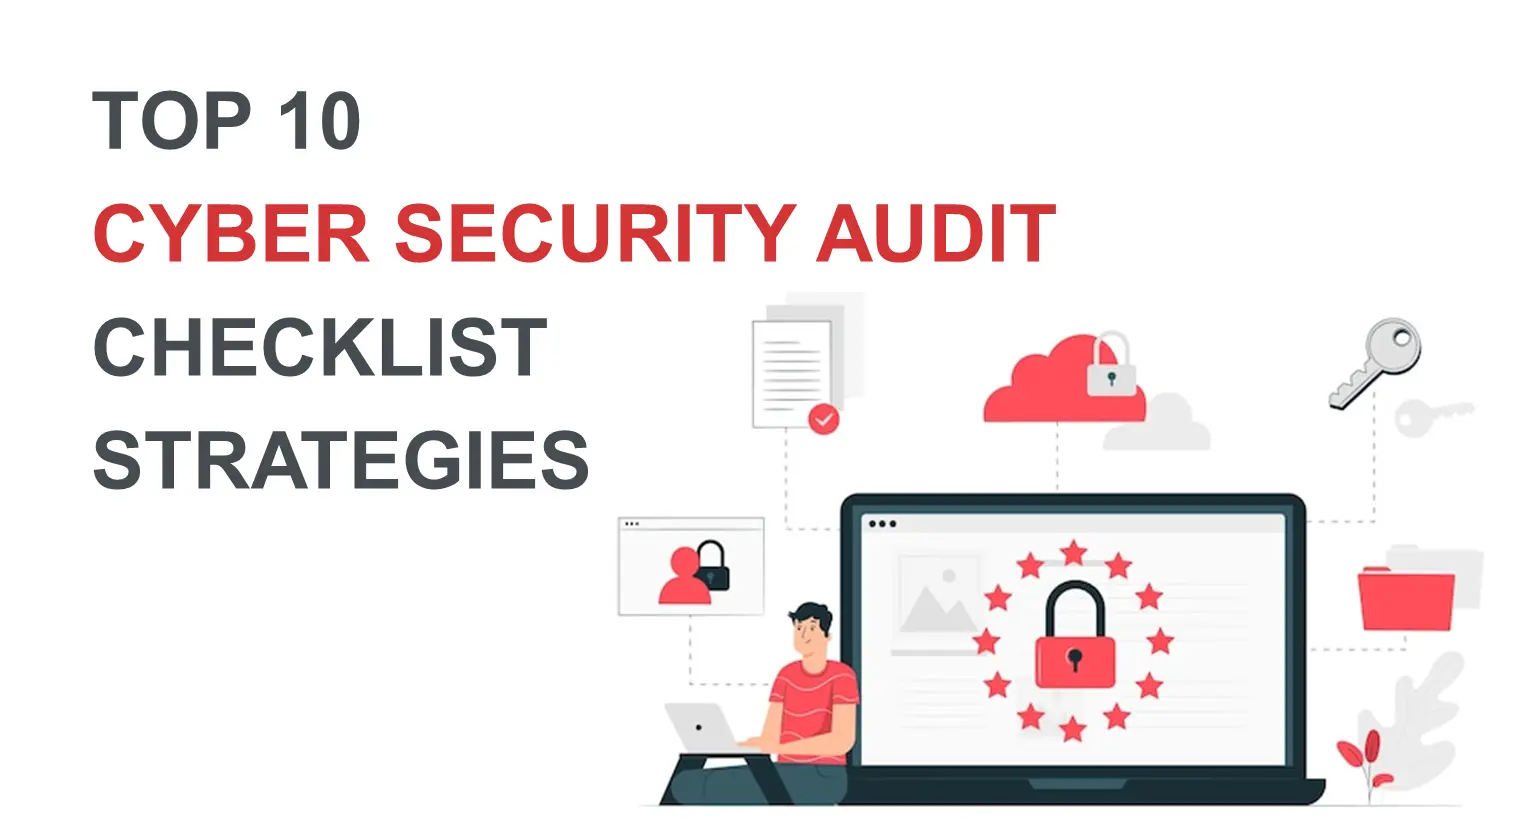 Top 10 Cyber Security Audit Checklist Strategies